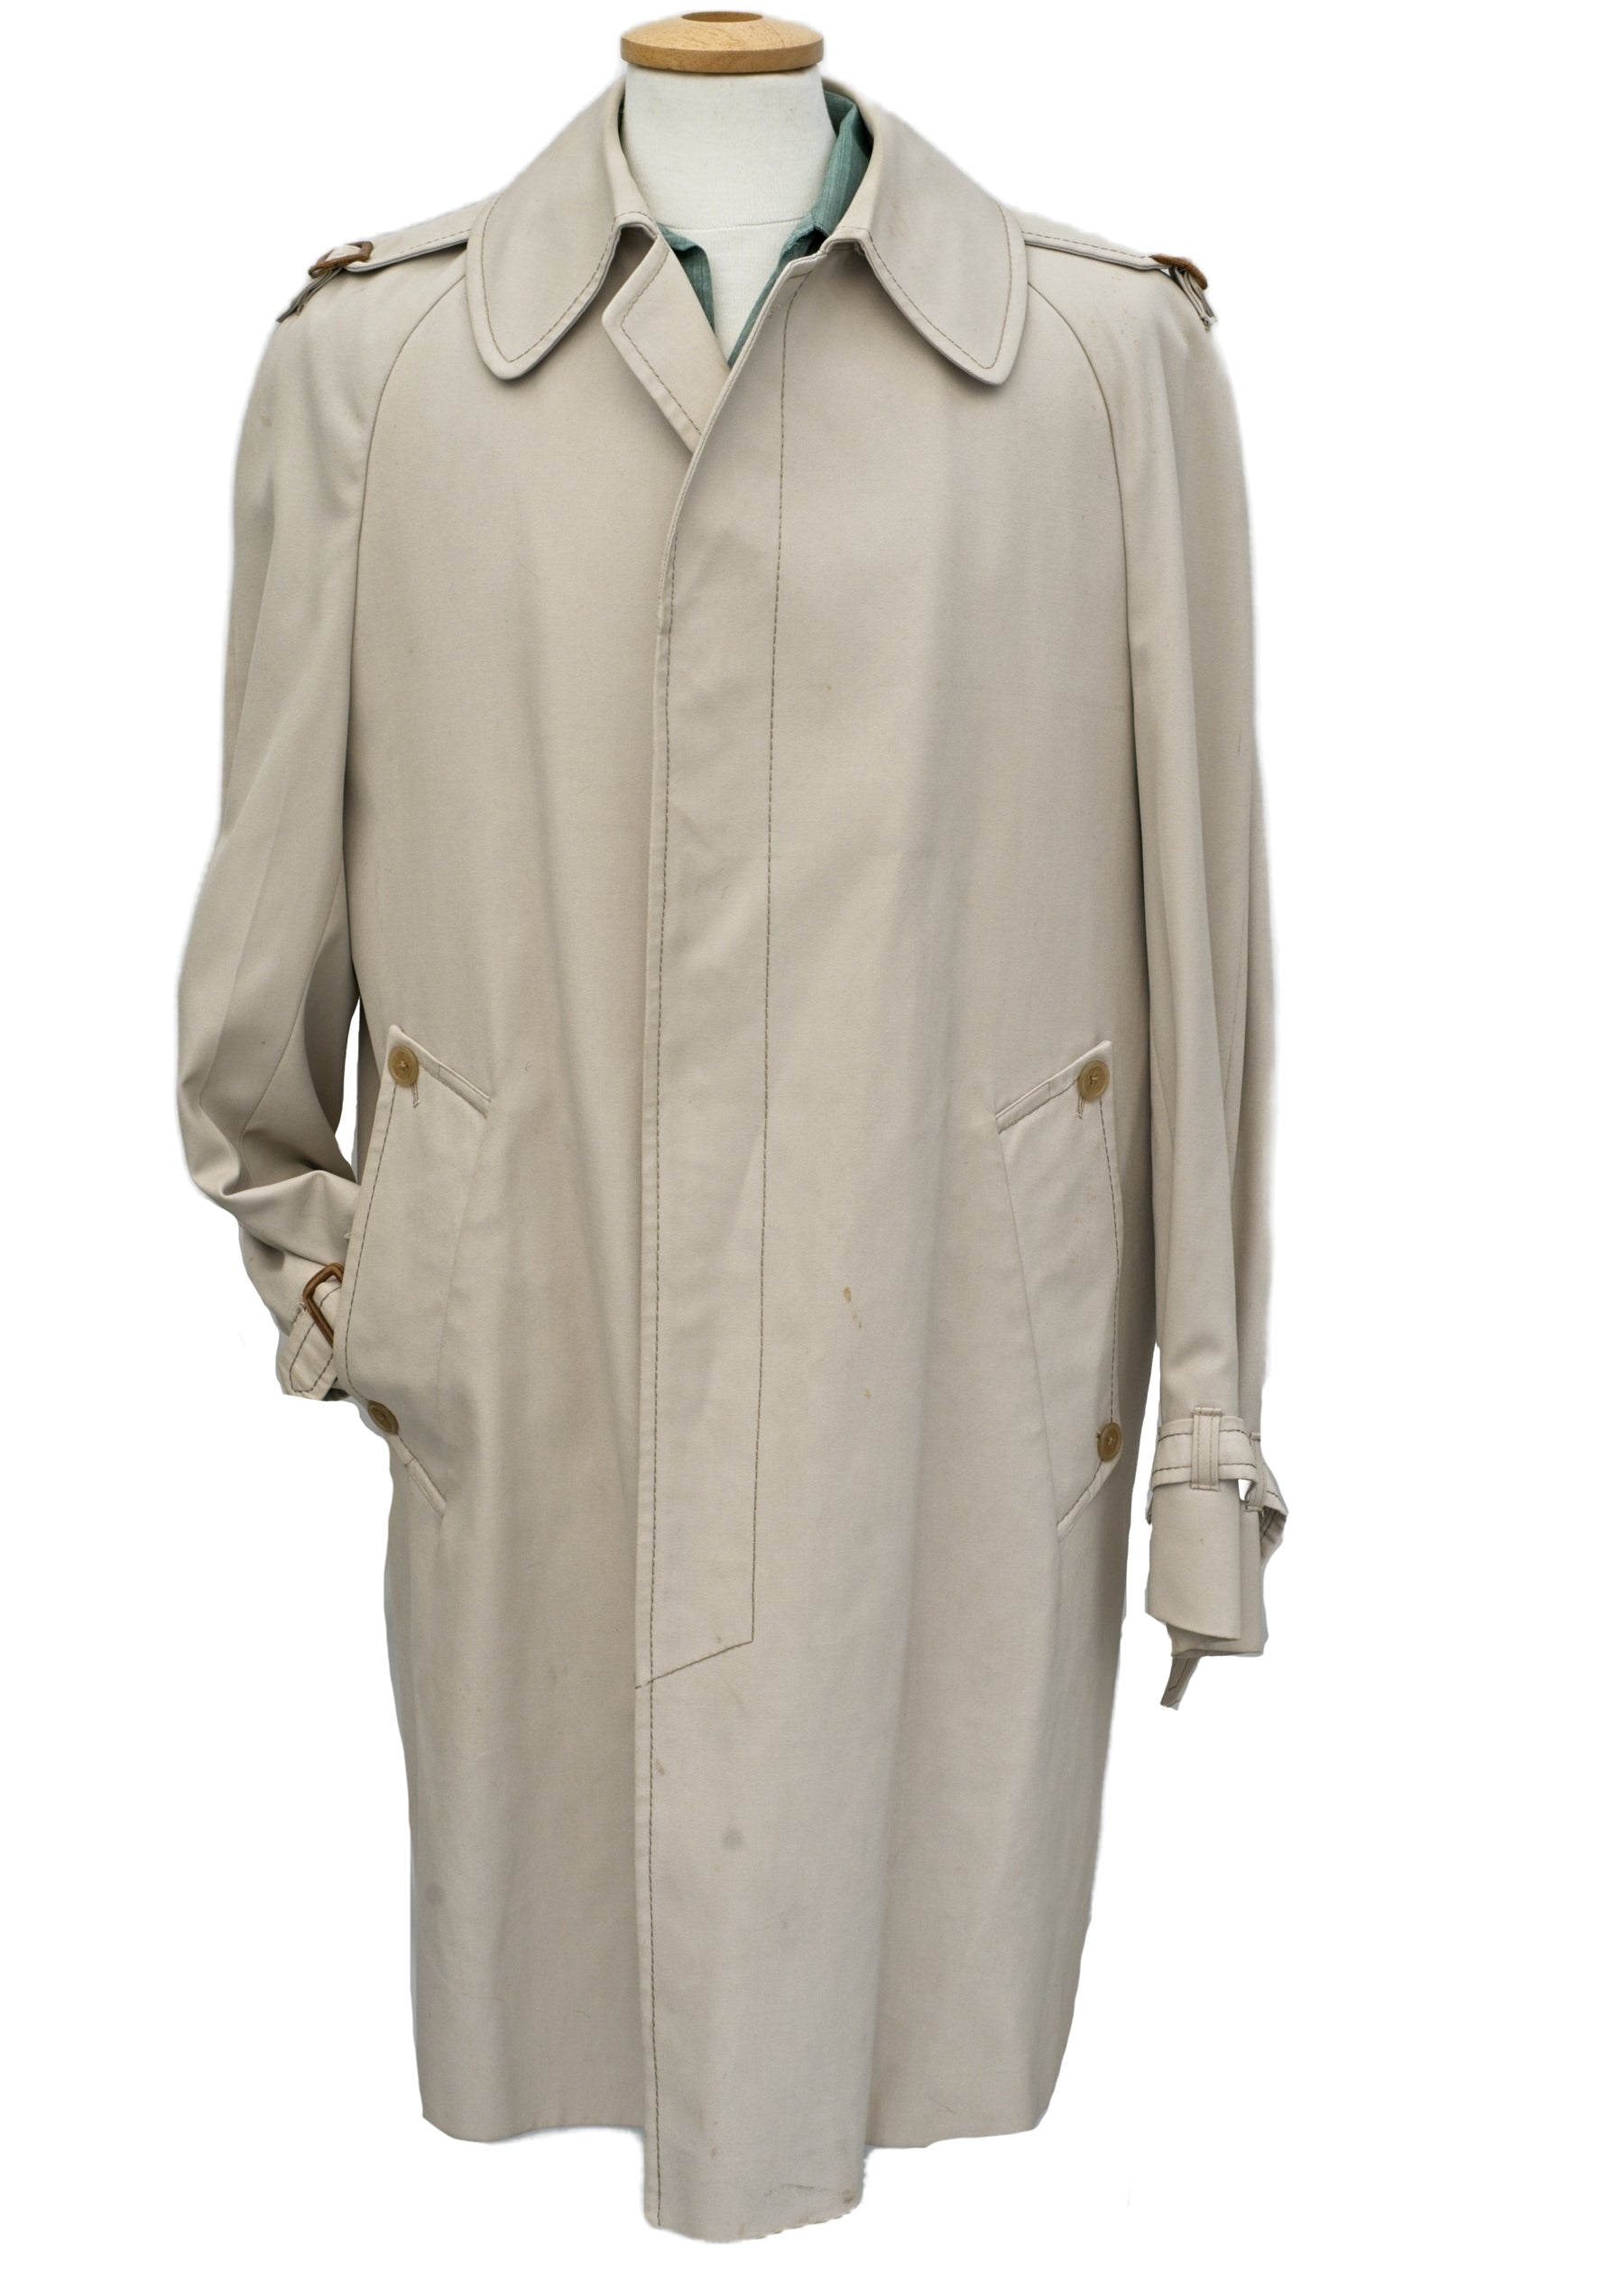 vintage 70s beige aquascutum raincoat, trench coat for men to fit 40 inch chest.